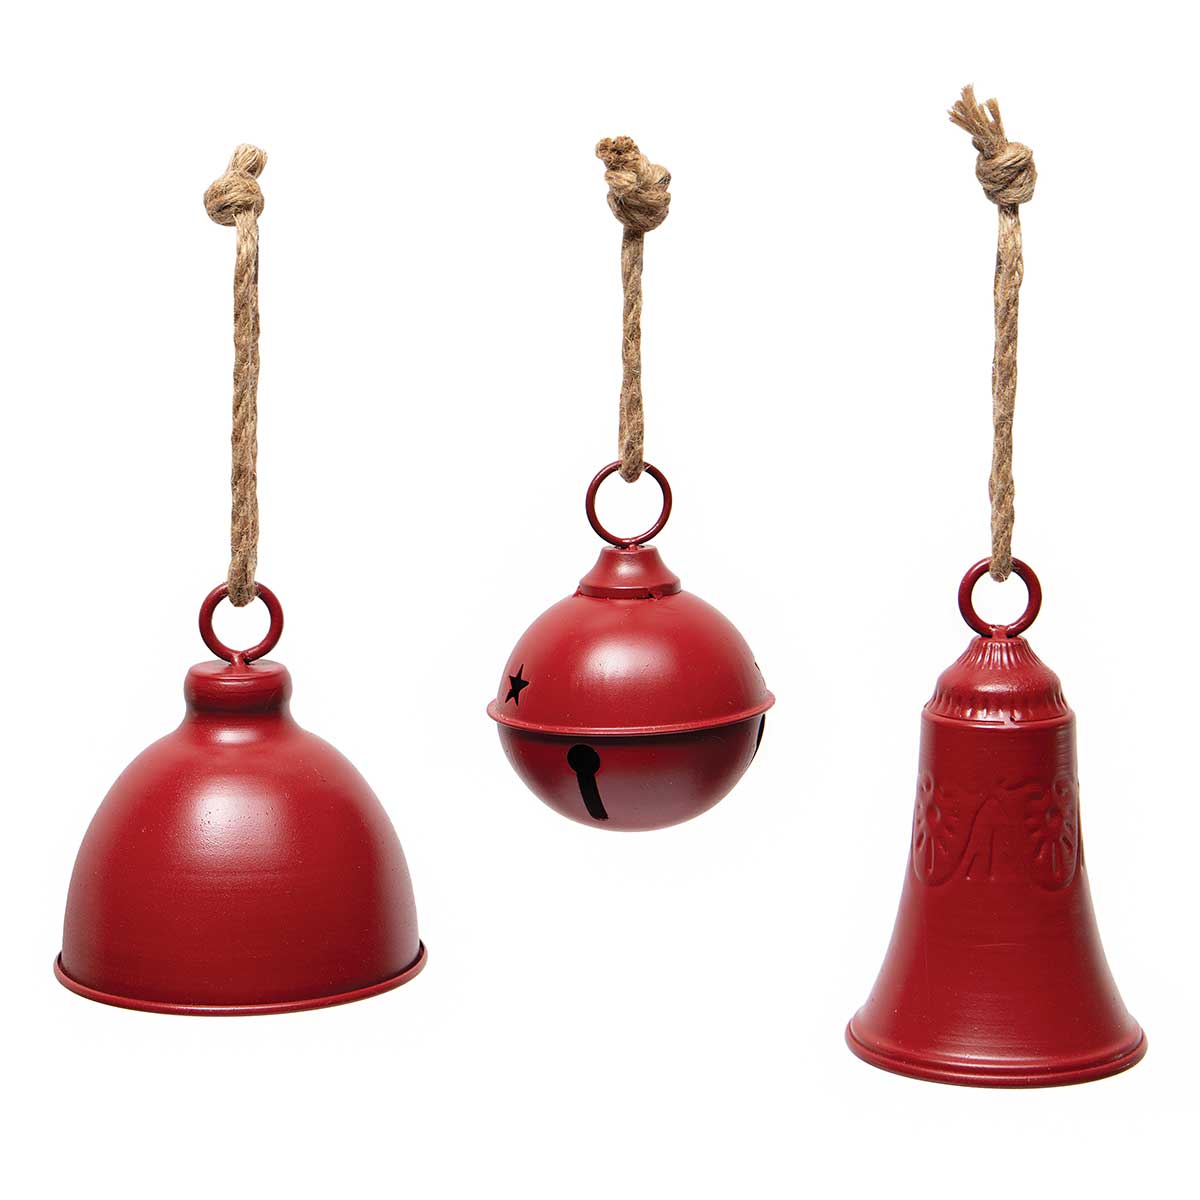 BELL SLEIGH/JINGLE MATTE RED 4IN X 5IN METAL WITH ROPE HANGER